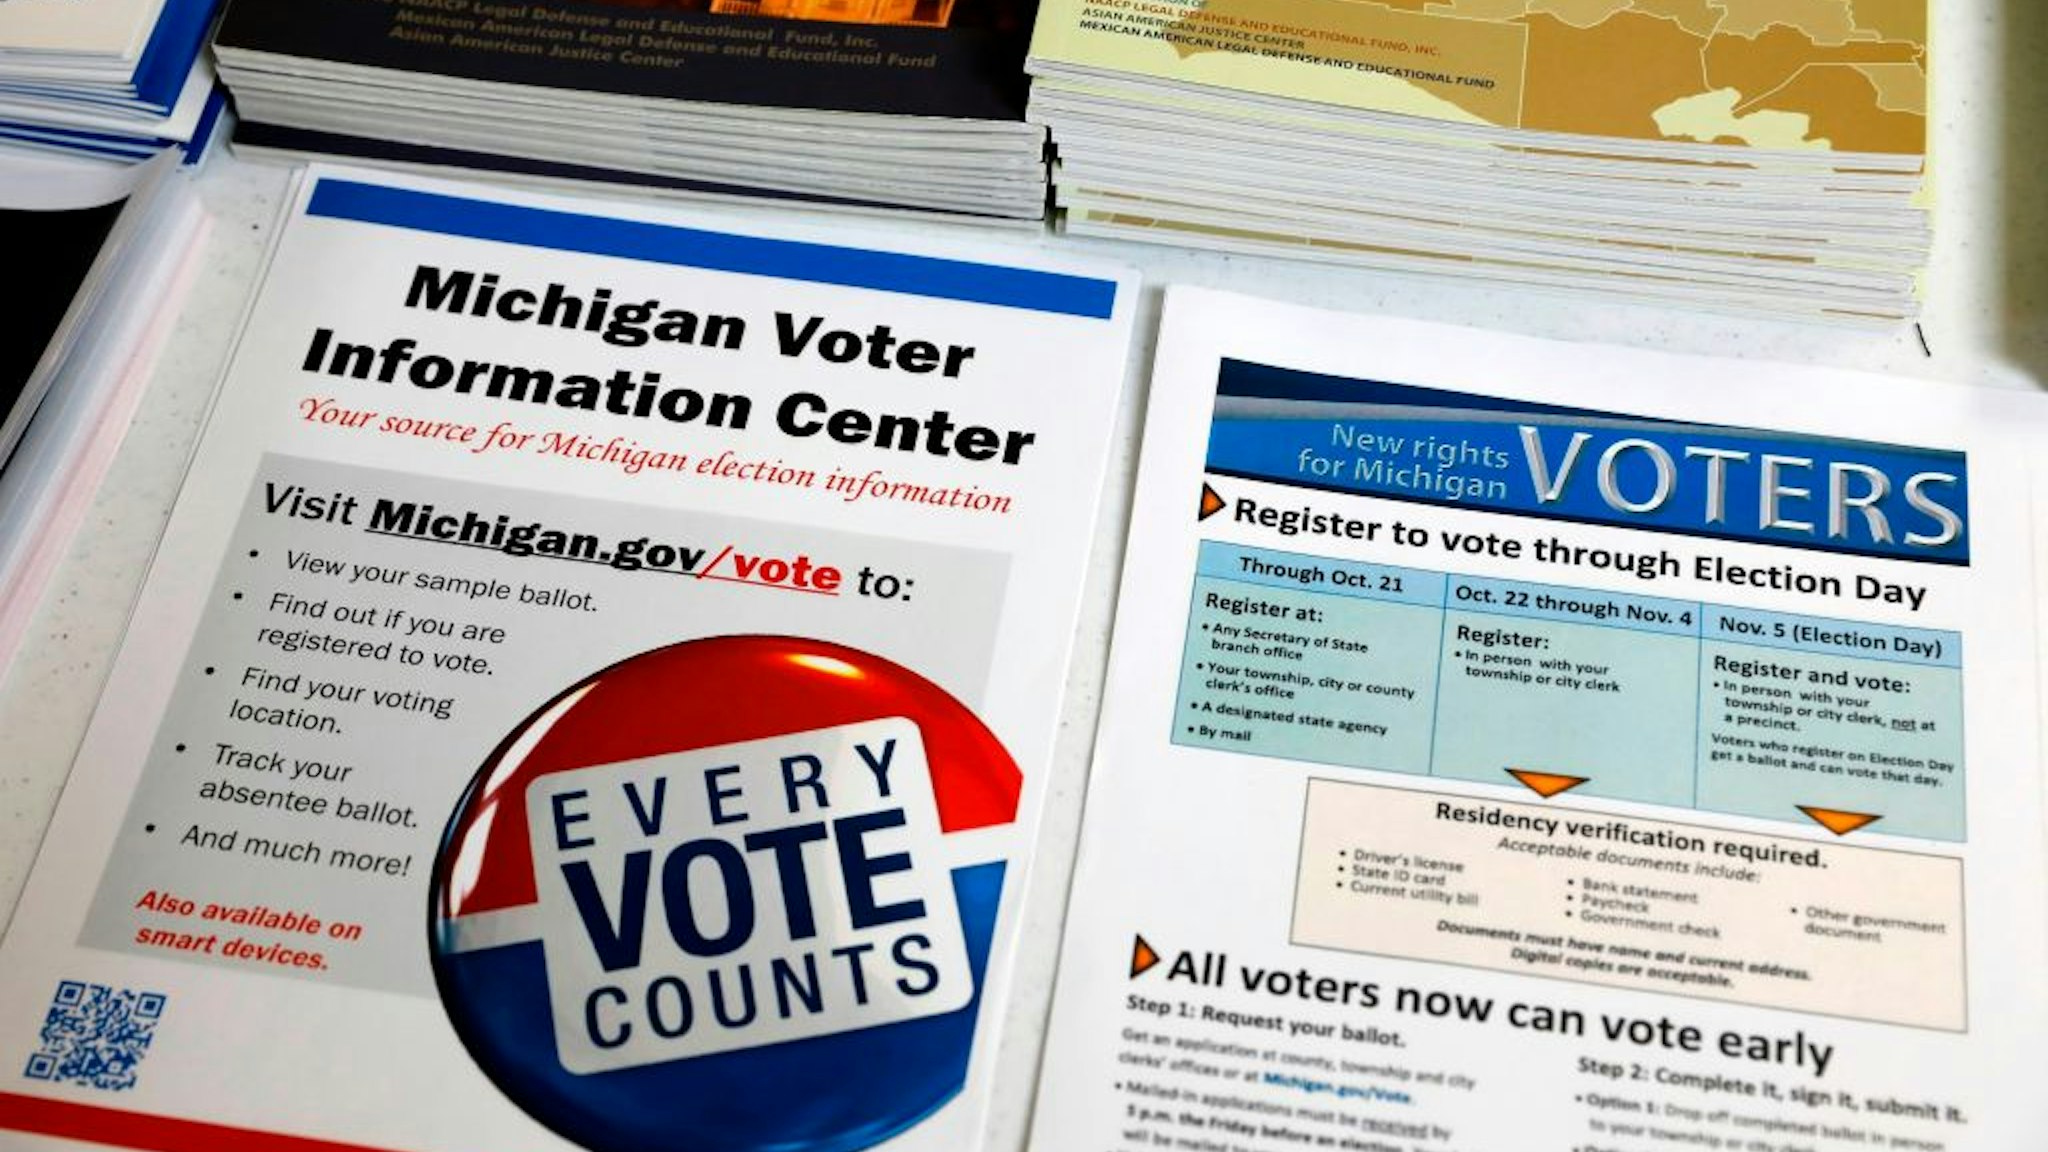 Voting literature is placed on the table at the NAACP office in Detroit, Michigan, on October 23, 2019.